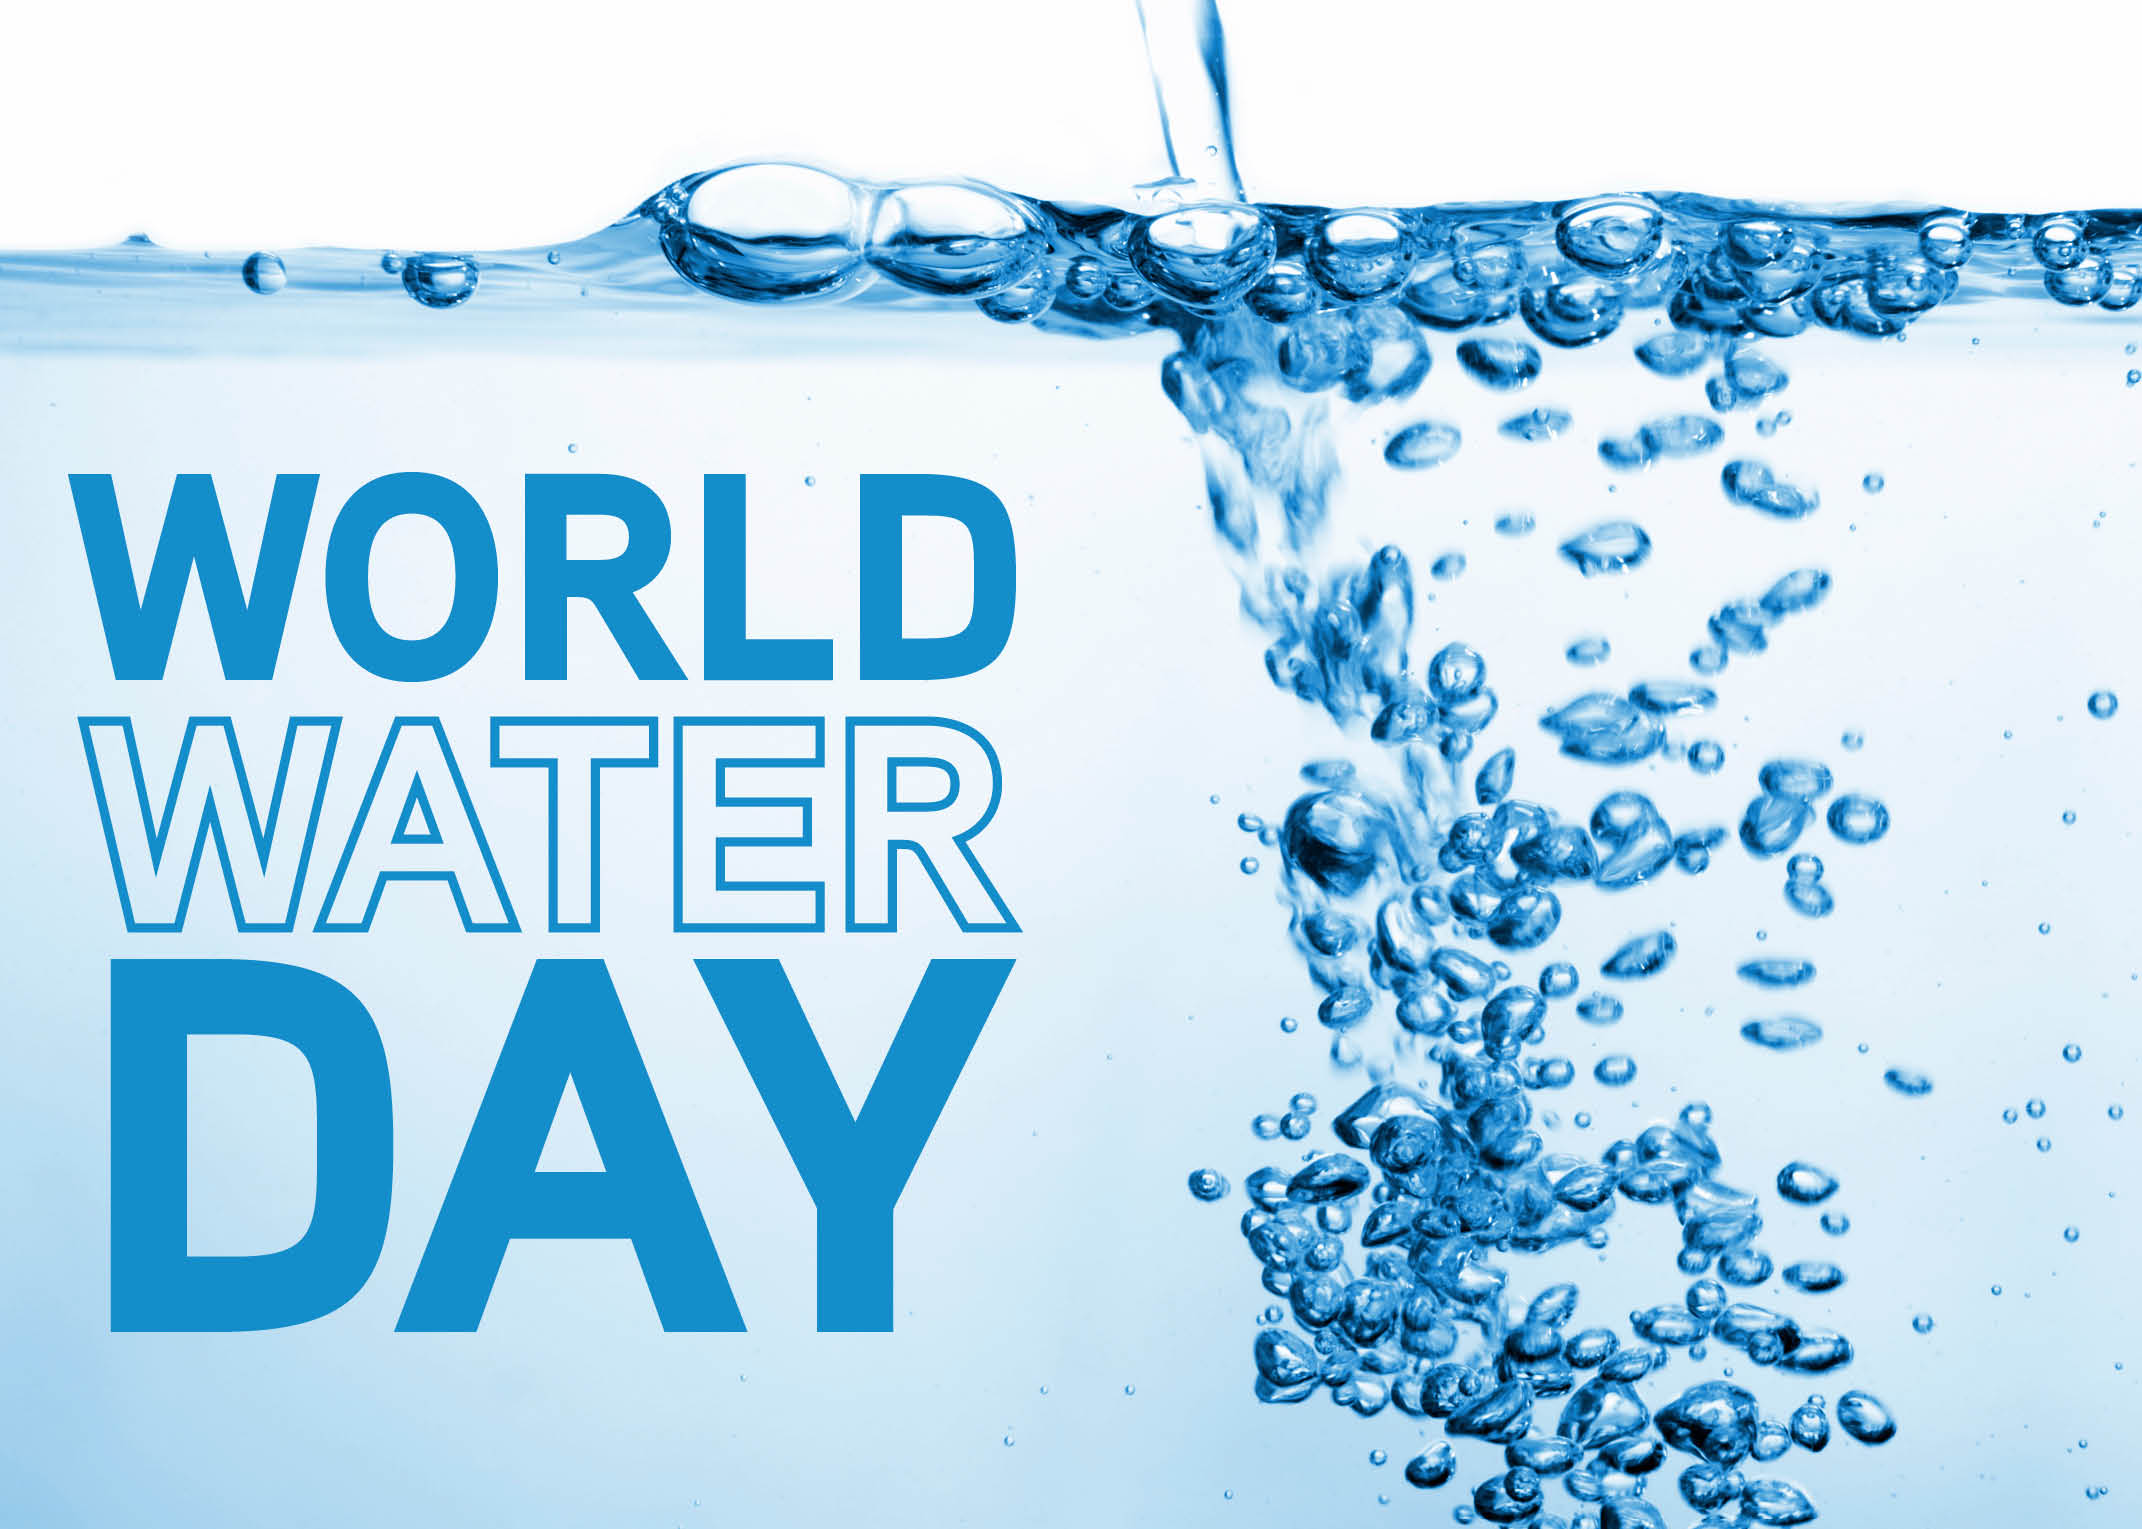 World Water Day title over image of water with bubbles